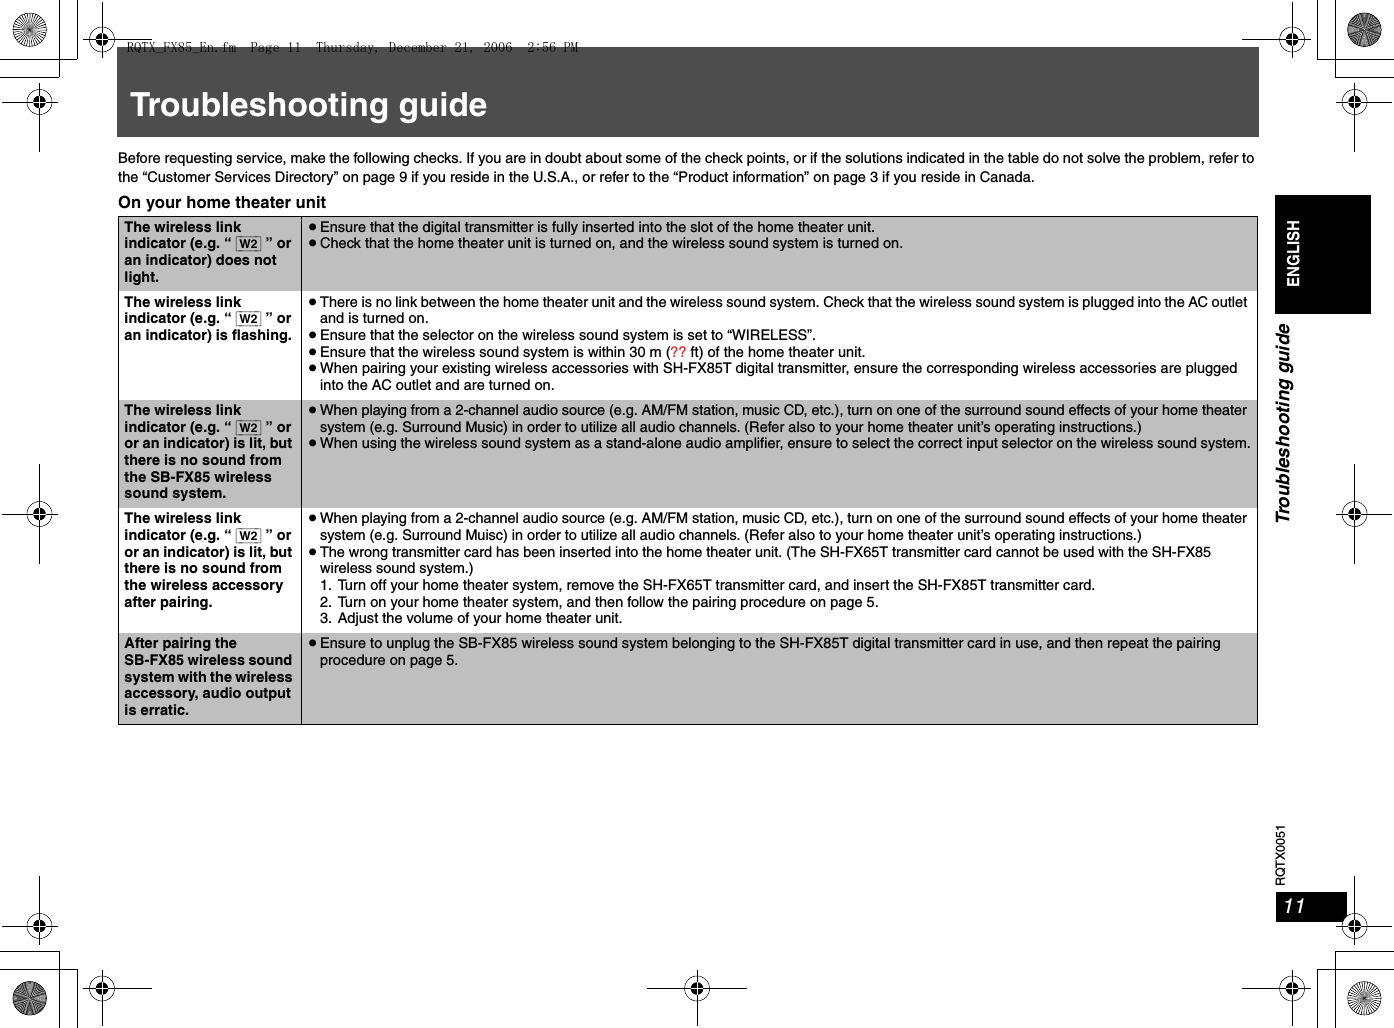 RQTX005111Troubleshooting guideENGLISHTroubleshooting guideBefore requesting service, make the following checks. If you are in doubt about some of the check points, or if the solutions indicated in the table do not solve the problem, refer to the “Customer Services Directory” on page 9 if you reside in the U.S.A., or refer to the “Product information” on page 3 if you reside in Canada.On your home theater unitThe wireless link indicator (e.g. “ [W2] ” or an indicator) does not light.≥Ensure that the digital transmitter is fully inserted into the slot of the home theater unit.≥Check that the home theater unit is turned on, and the wireless sound system is turned on.The wireless link indicator (e.g. “ [W2] ” or an indicator) is flashing.≥There is no link between the home theater unit and the wireless sound system. Check that the wireless sound system is plugged into the AC outlet and is turned on.≥Ensure that the selector on the wireless sound system is set to “WIRELESS”.≥Ensure that the wireless sound system is within 30 m (?? ft) of the home theater unit.≥When pairing your existing wireless accessories with SH-FX85T digital transmitter, ensure the corresponding wireless accessories are plugged into the AC outlet and are turned on.The wireless link indicator (e.g. “ [W2] ” or or an indicator) is lit, but there is no sound from the SB-FX85 wireless sound system.≥When playing from a 2-channel audio source (e.g. AM/FM station, music CD, etc.), turn on one of the surround sound effects of your home theater system (e.g. Surround Music) in order to utilize all audio channels. (Refer also to your home theater unit’s operating instructions.)≥When using the wireless sound system as a stand-alone audio amplifier, ensure to select the correct input selector on the wireless sound system.The wireless link indicator (e.g. “ [W2] ” or or an indicator) is lit, but there is no sound from the wireless accessory after pairing.≥When playing from a 2-channel audio source (e.g. AM/FM station, music CD, etc.), turn on one of the surround sound effects of your home theater system (e.g. Surround Muisc) in order to utilize all audio channels. (Refer also to your home theater unit’s operating instructions.)≥The wrong transmitter card has been inserted into the home theater unit. (The SH-FX65T transmitter card cannot be used with the SH-FX85 wireless sound system.)1. Turn off your home theater system, remove the SH-FX65T transmitter card, and insert the SH-FX85T transmitter card.2. Turn on your home theater system, and then follow the pairing procedure on page 5.3. Adjust the volume of your home theater unit.After pairing the SB-FX85 wireless sound system with the wireless accessory, audio output is erratic.≥Ensure to unplug the SB-FX85 wireless sound system belonging to the SH-FX85T digital transmitter card in use, and then repeat the pairing procedure on page 5.RQTX_FX85_En.fm  Page 11  Thursday, December 21, 2006  2:56 PM